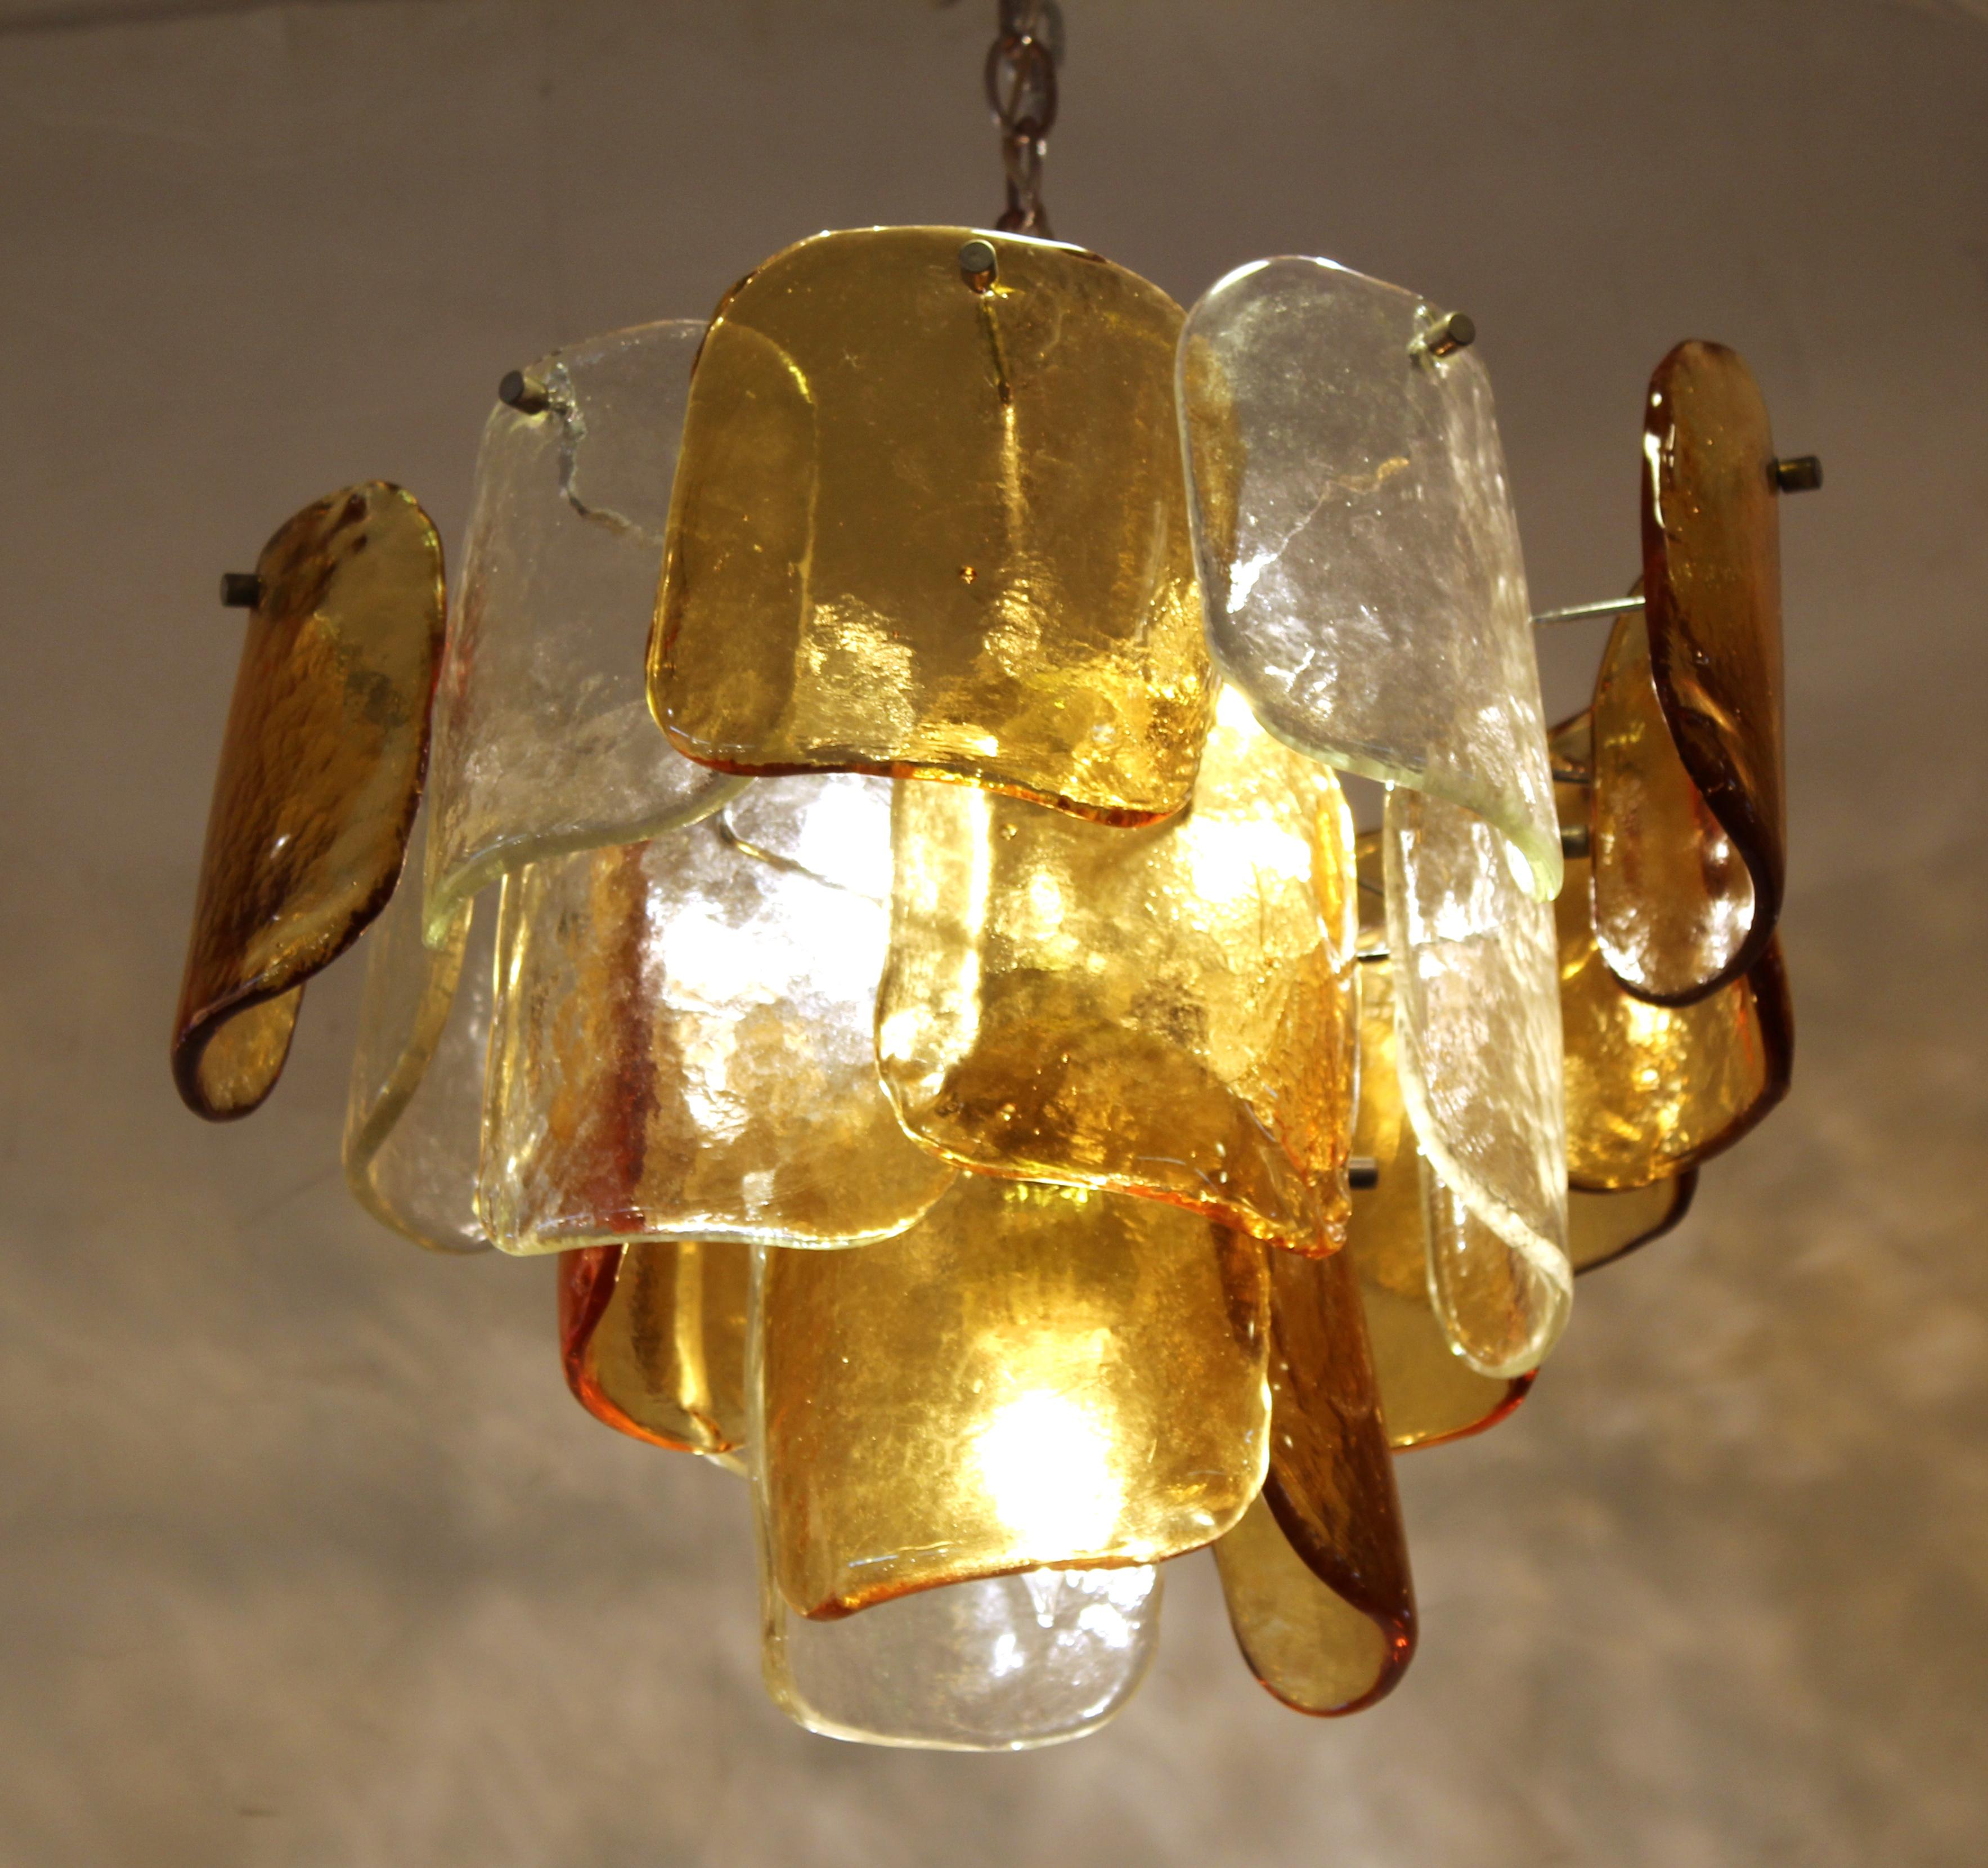 Mazzega Italian Mid-Century Modern glass chandelier with three tiers of glass elements in concentric circles. The piece was manufactured in Murano, Italy and is in great vintage condition.